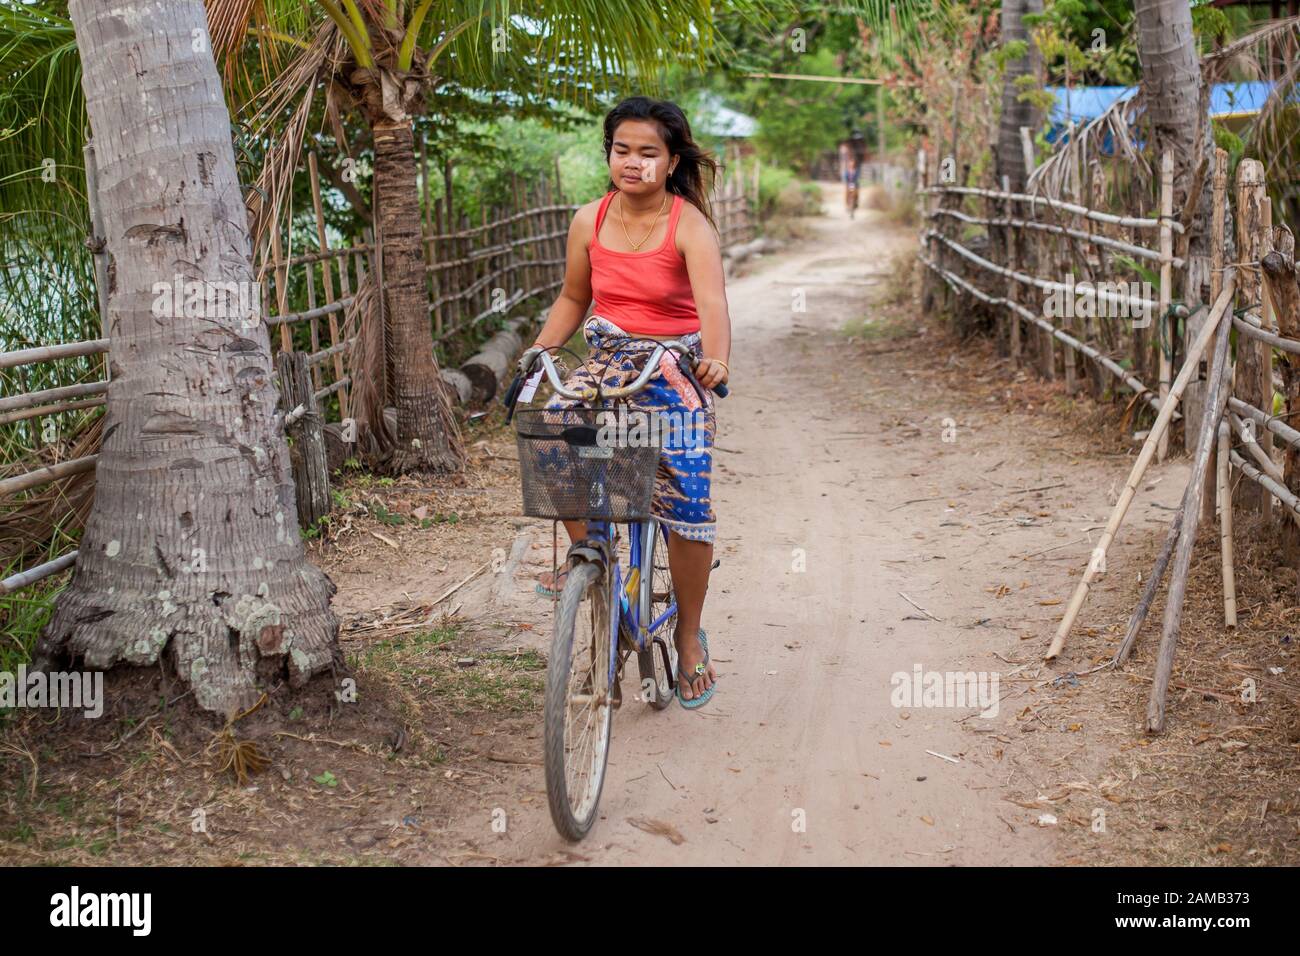 DON DET, LAOS - APRIL 5, 2013: An unidentified girl riding a bicycle through the village of Don Dhet, Laos. Stock Photo